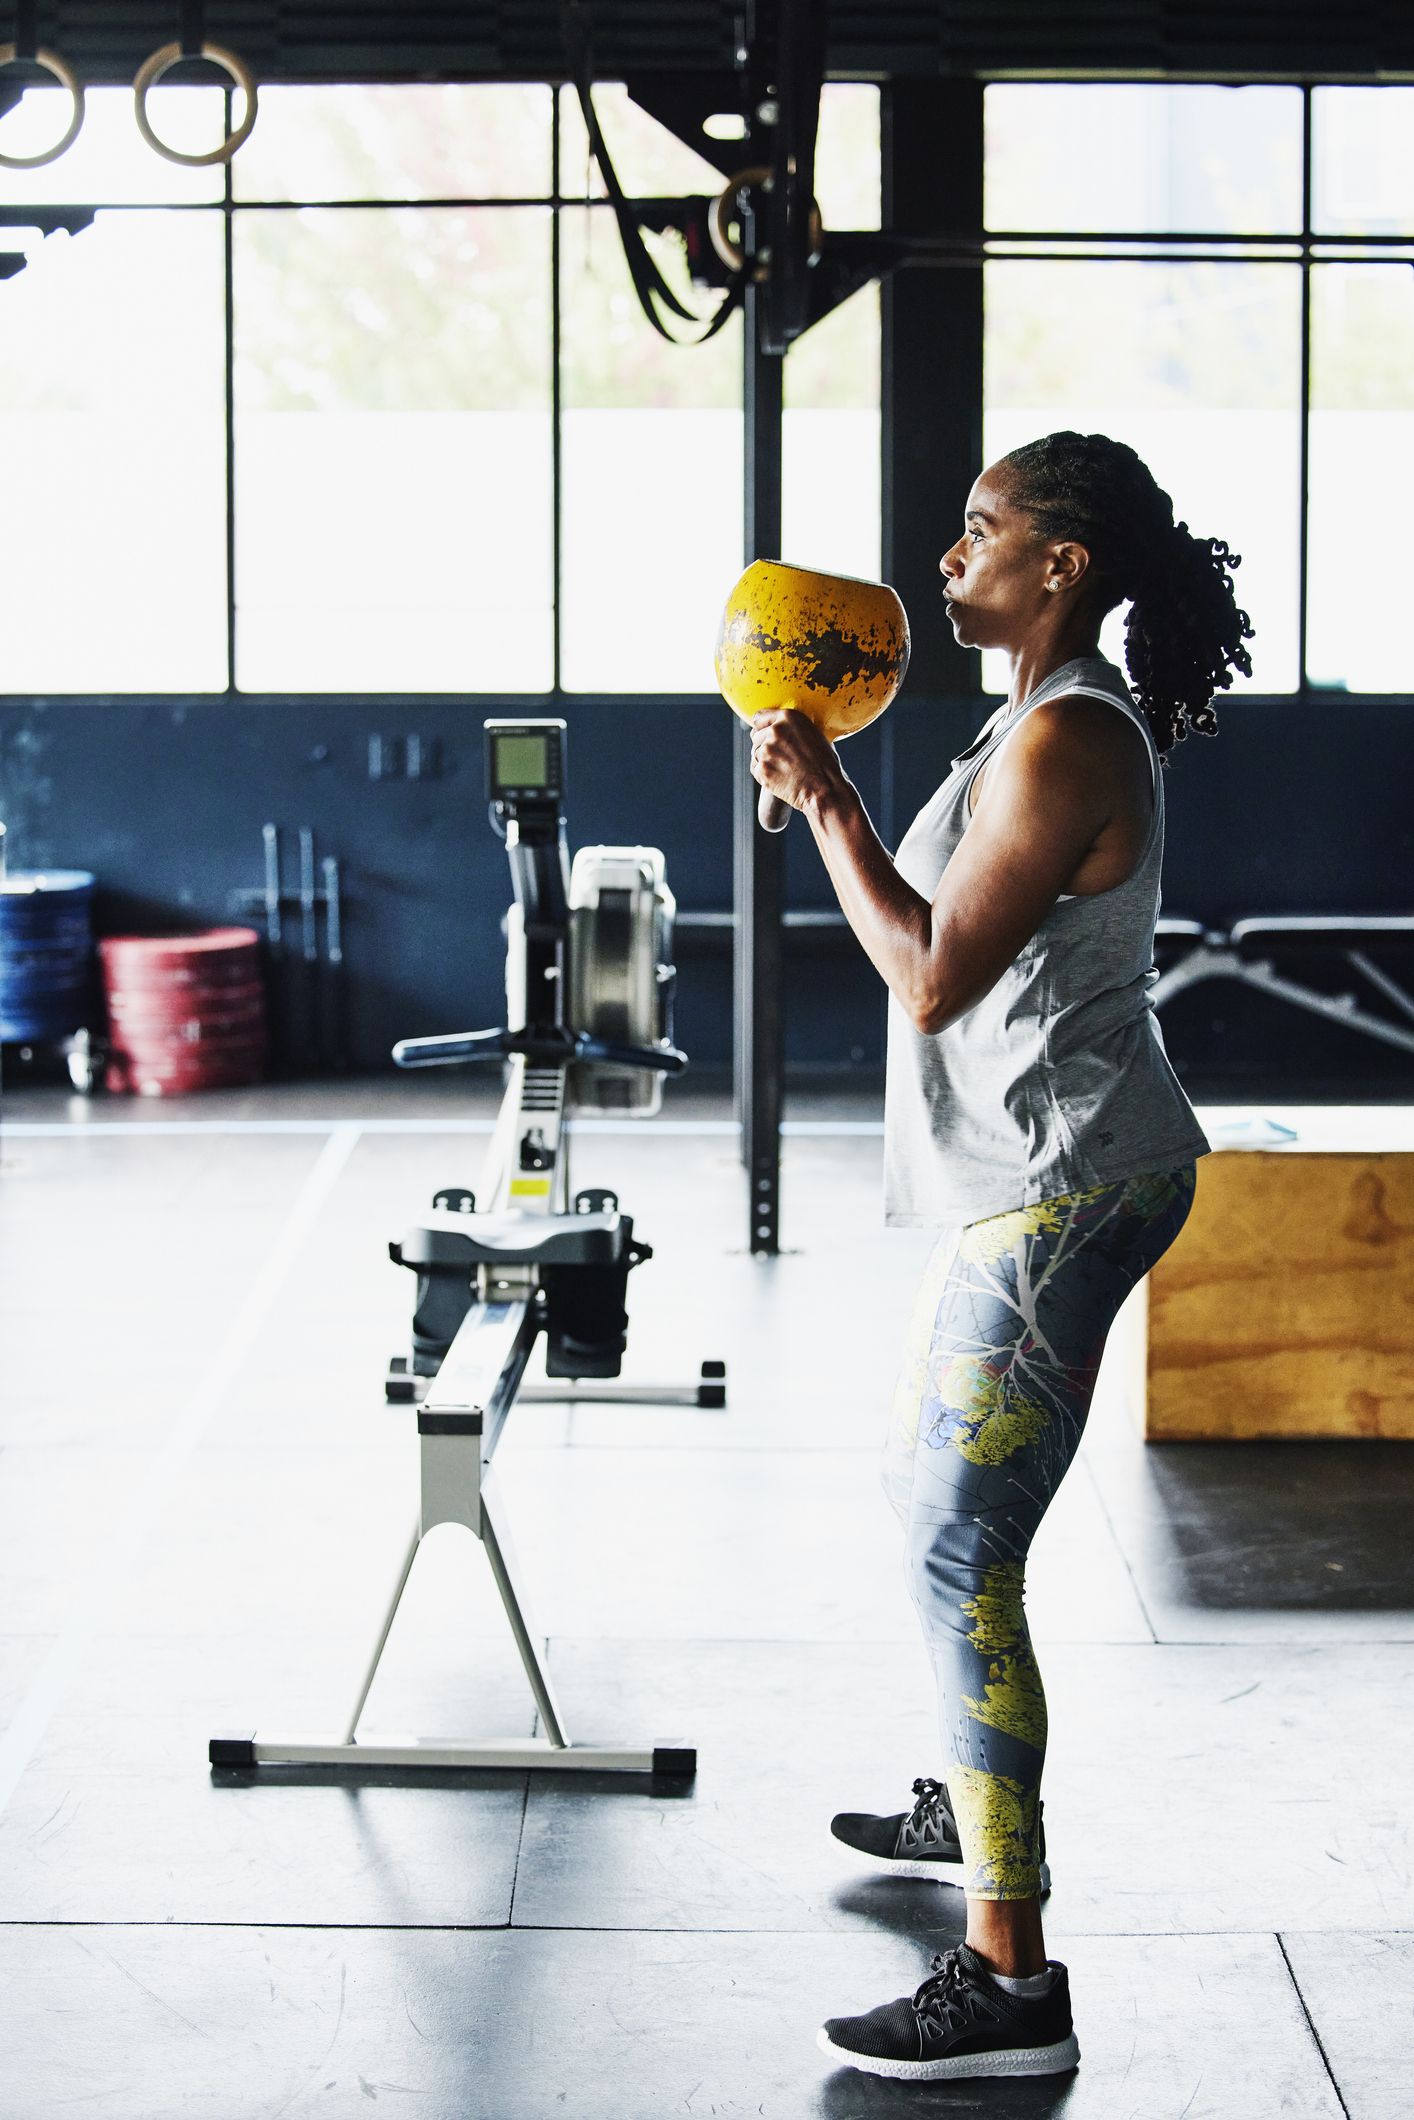 How Often Should You Perform Your Kettlebell Workouts